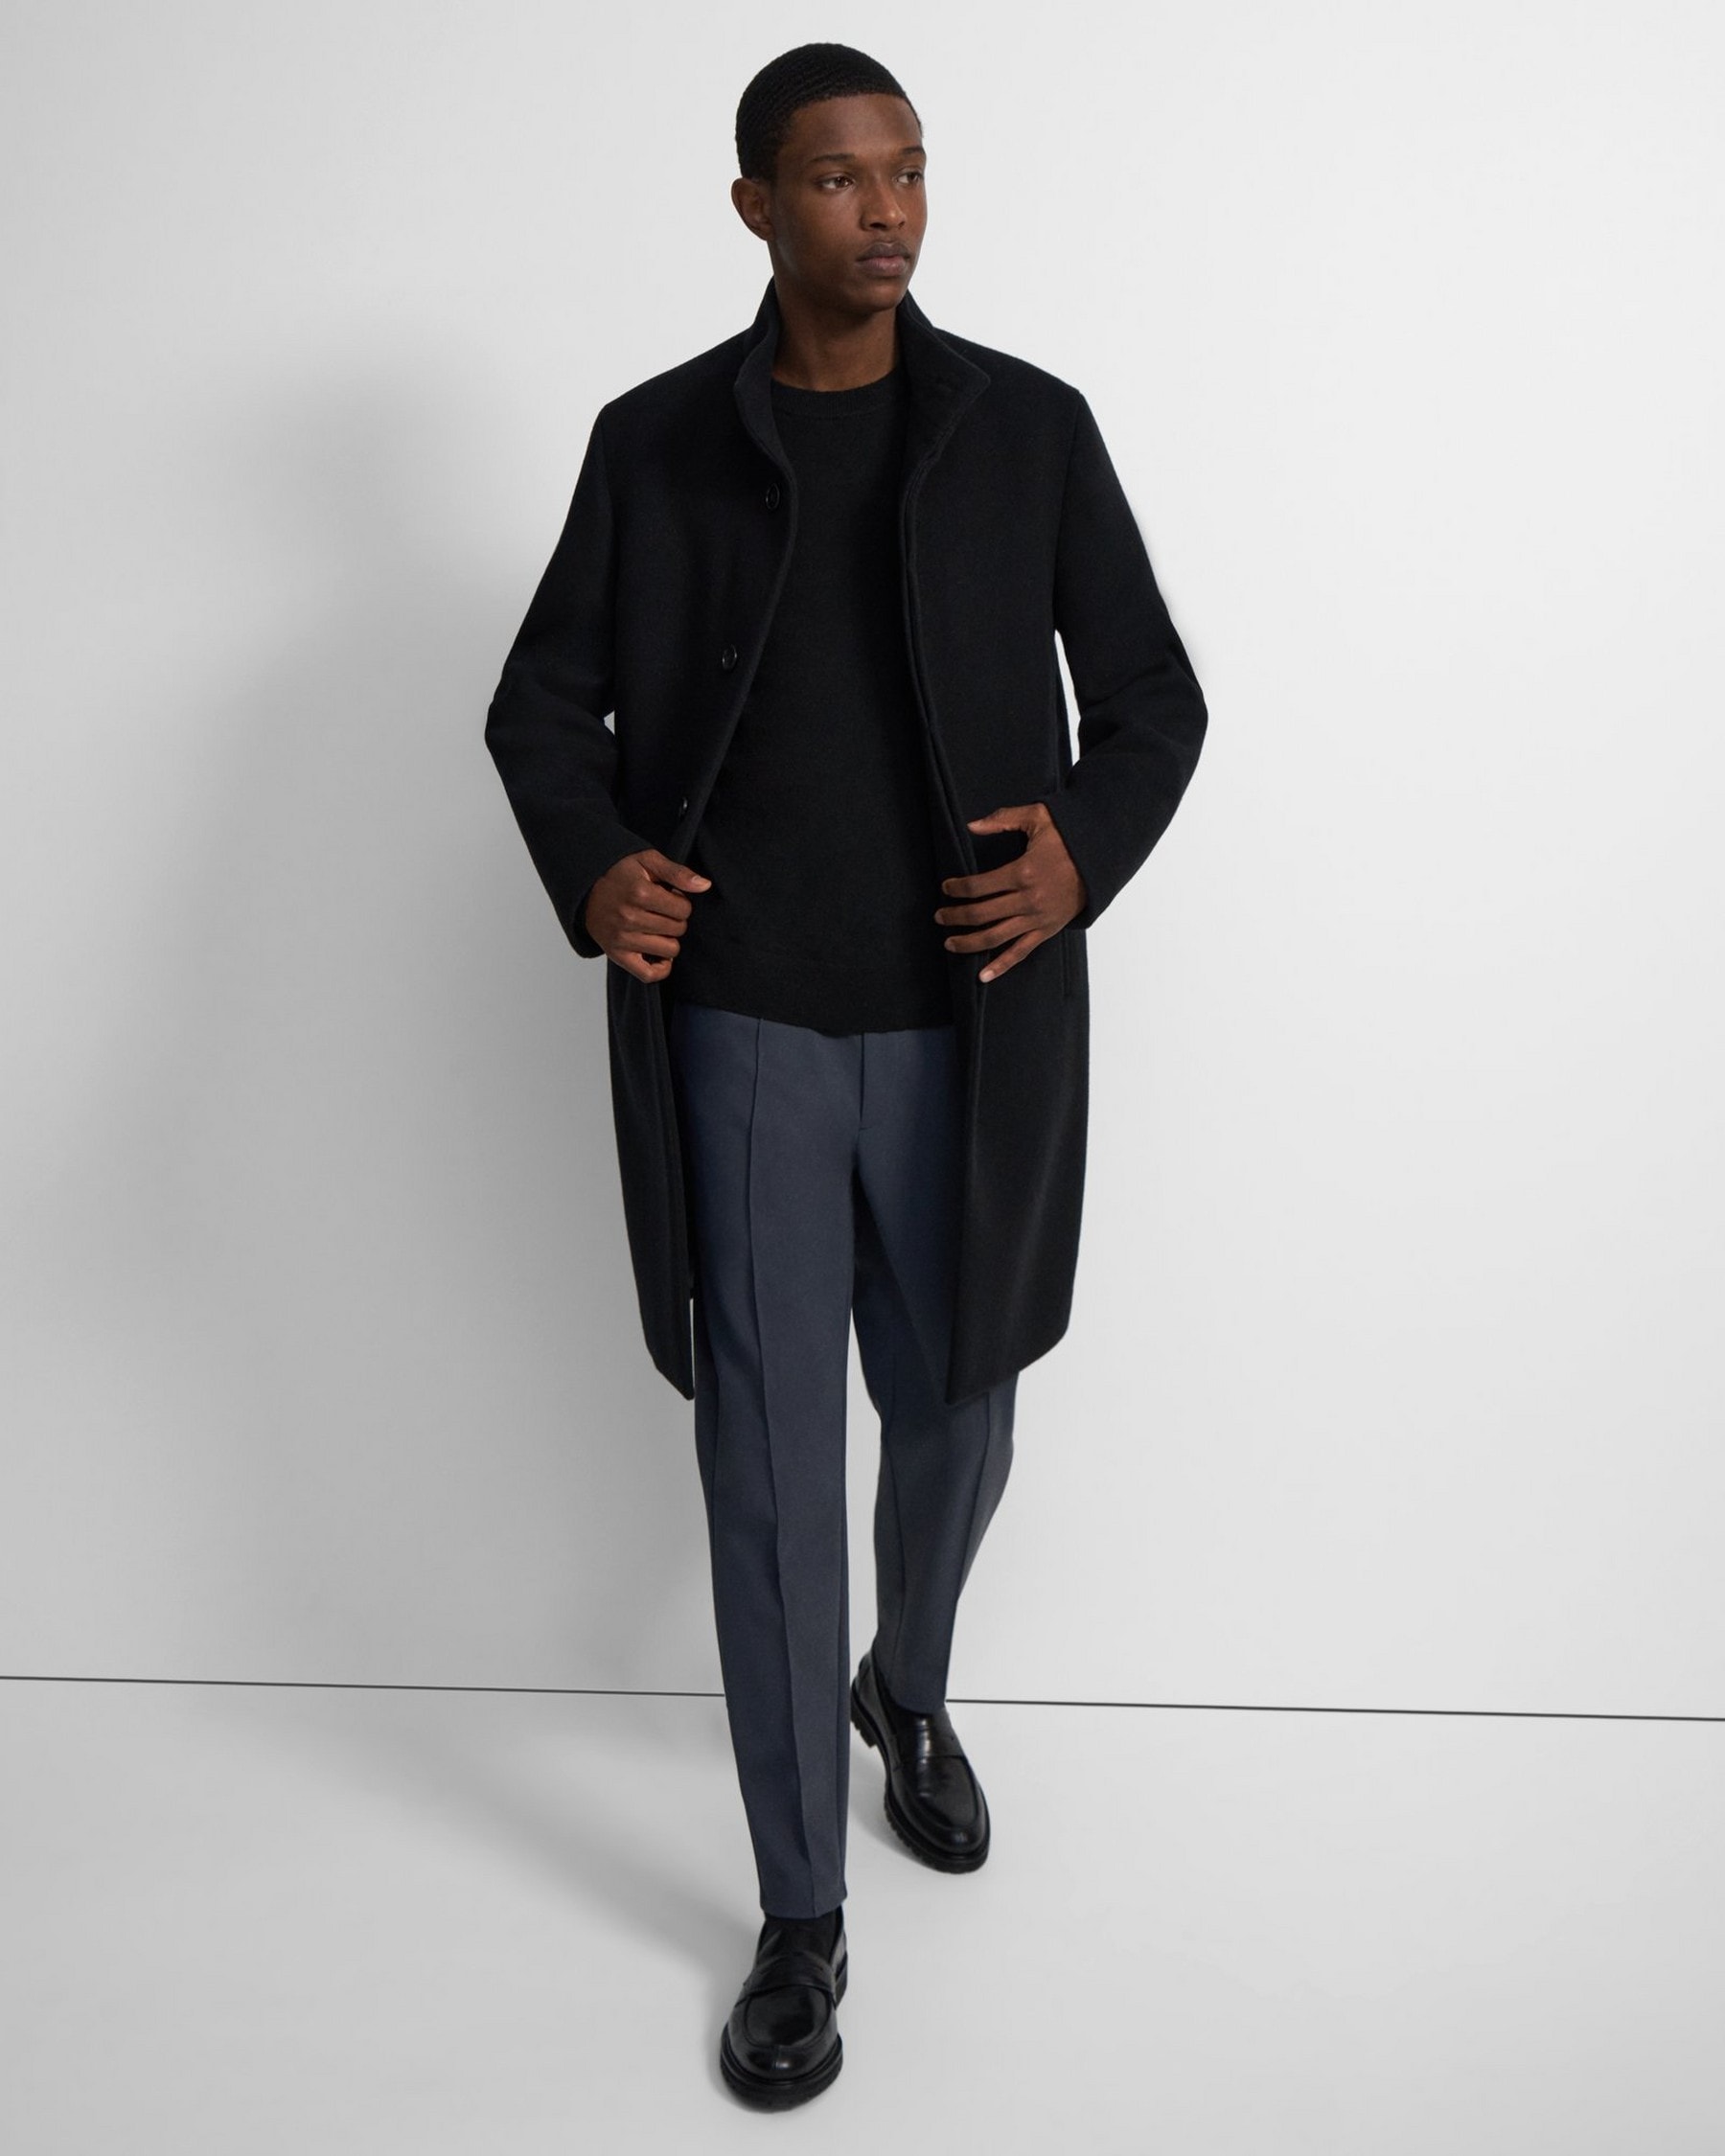 Theory Belvin Coat in Recycled Wool Melton